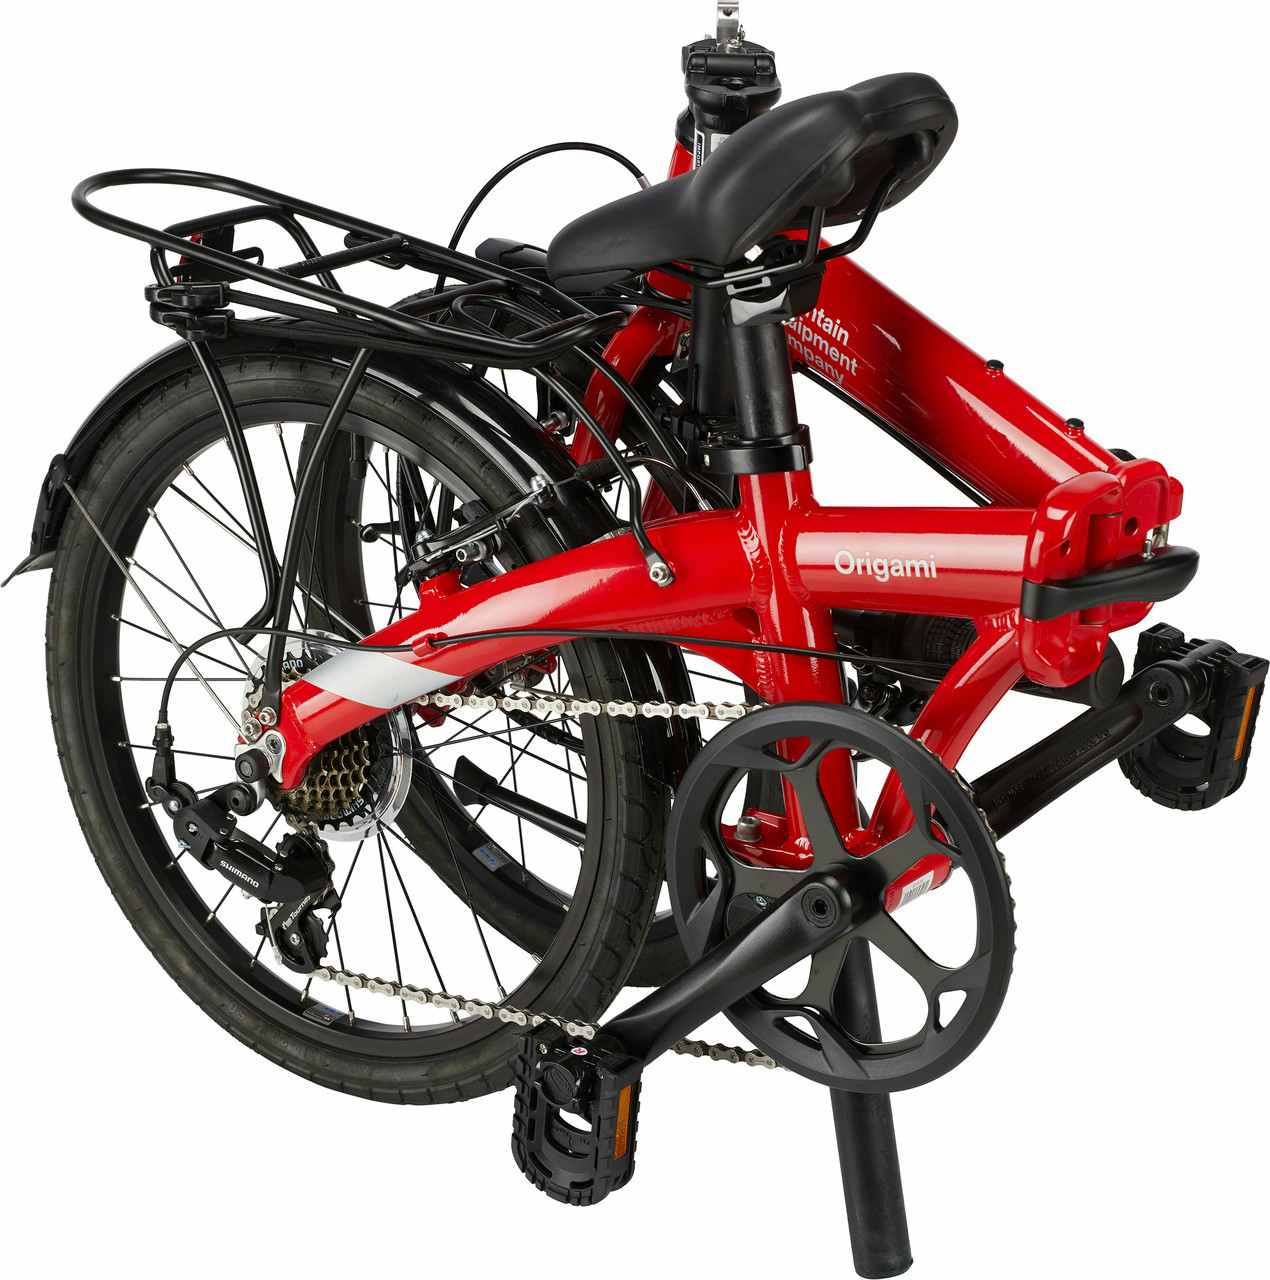 Origami LTD Folding Bicycle Red